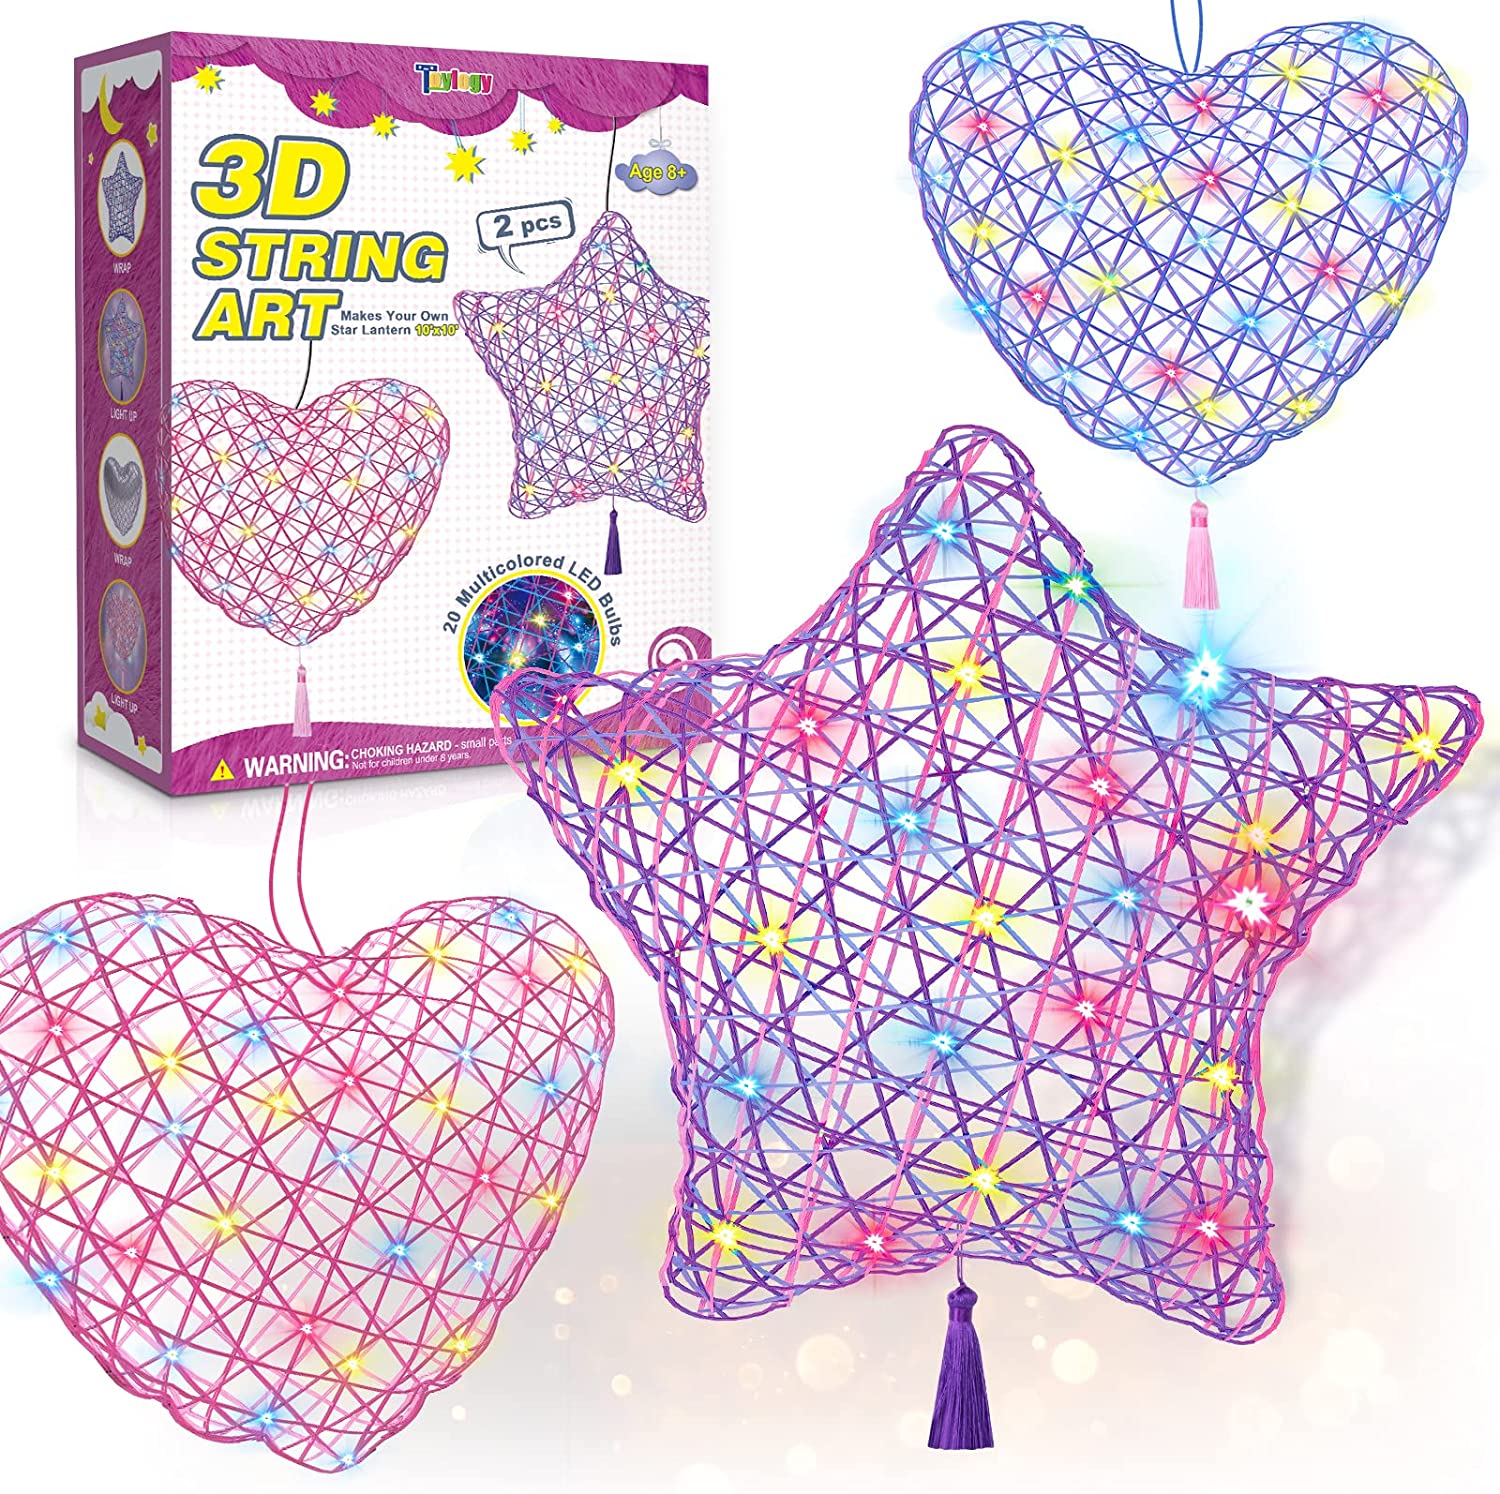 Hapinest String Art Craft Kit Gifts for Tween Girls Ages 10 11 12 Years Old  and Up